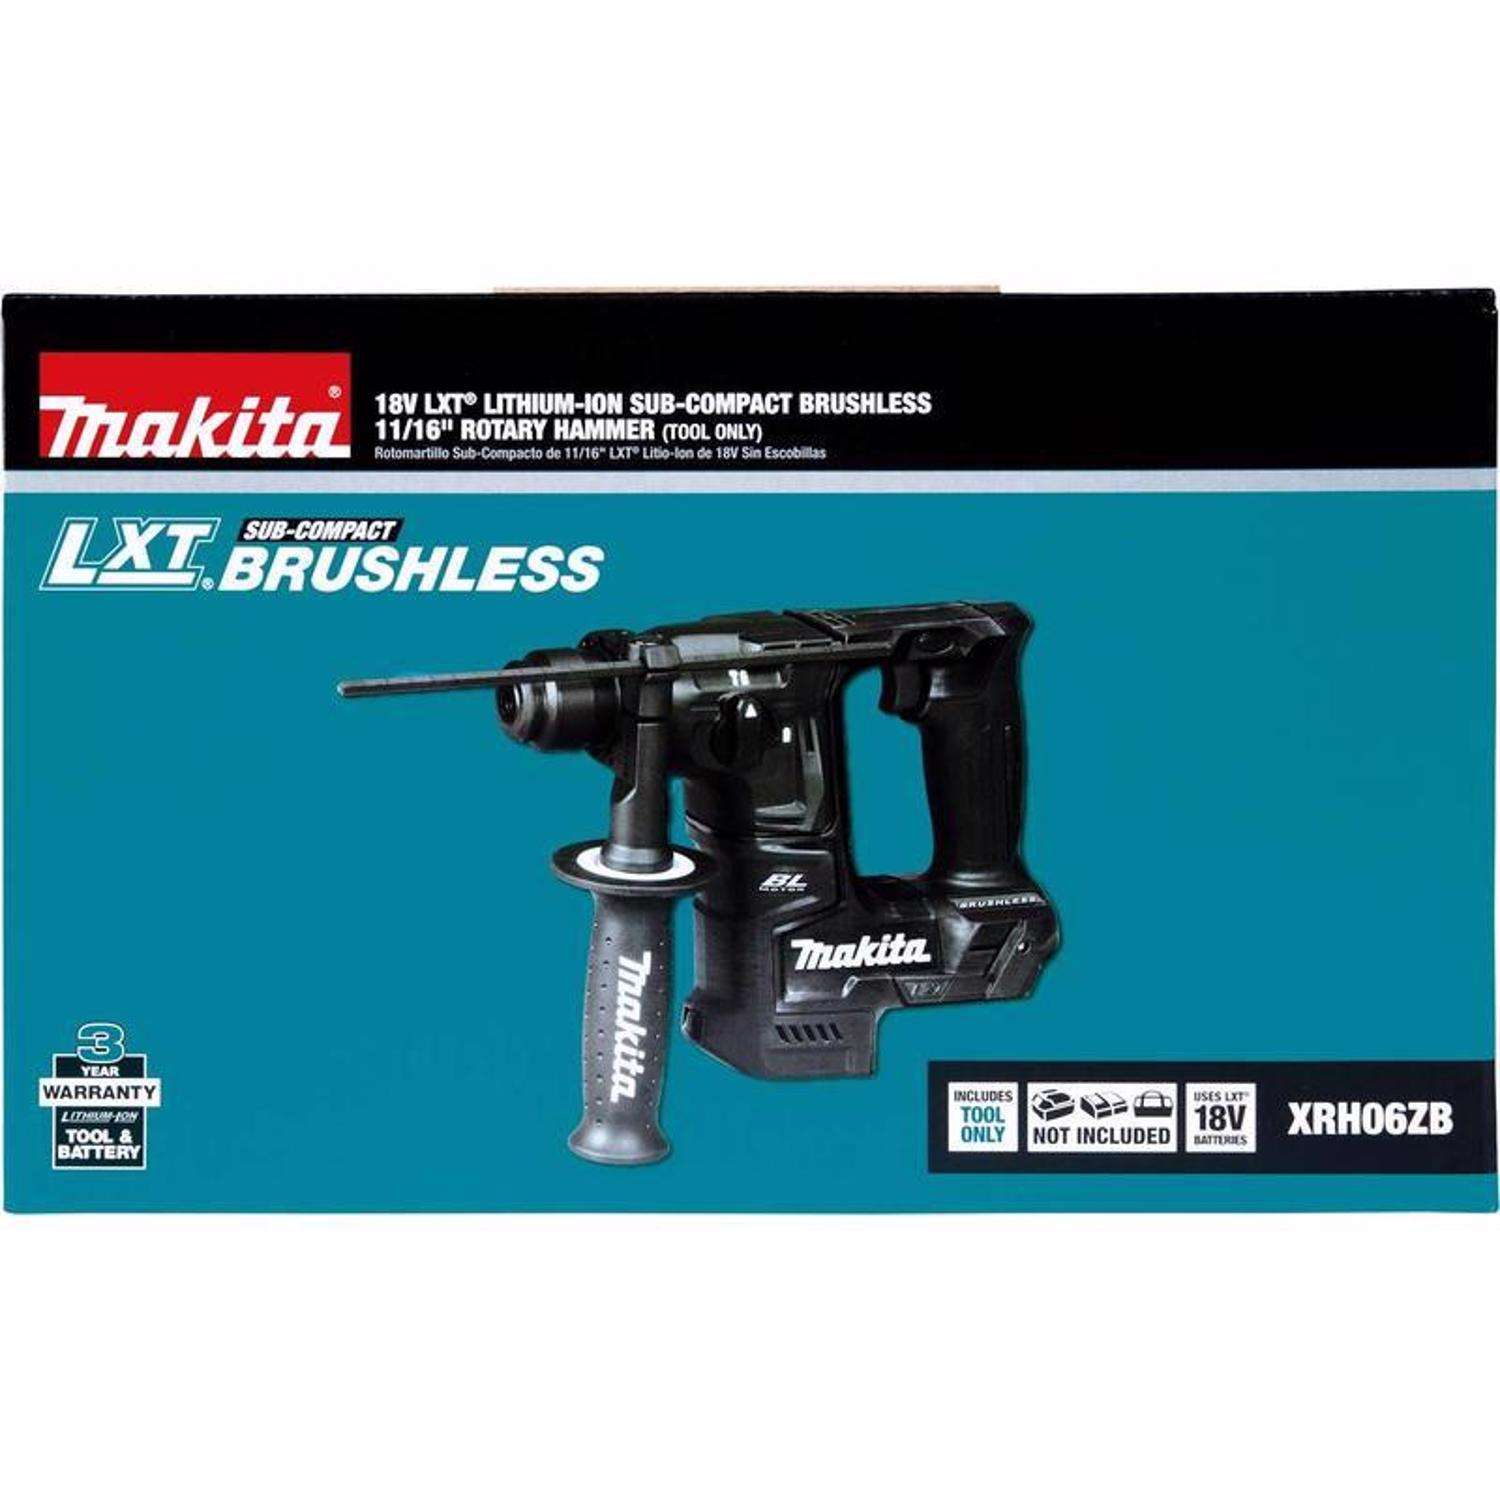 Makita 18V LXT 11/16 in. Cordless SDS-Plus Rotary Hammer Drill Tool Only